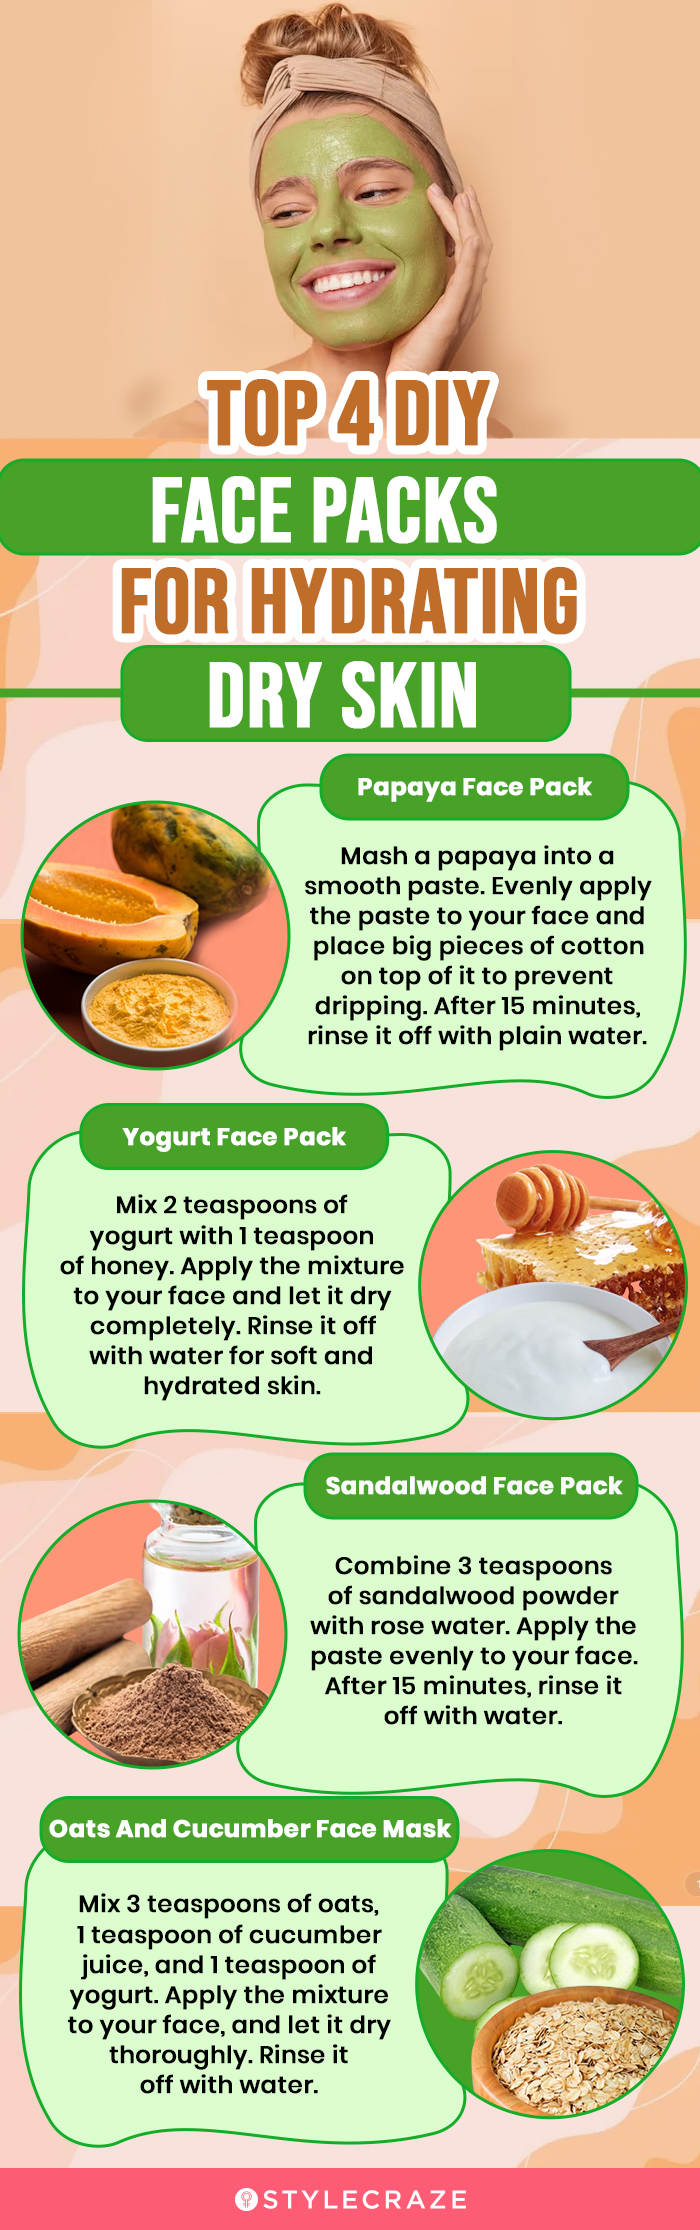 top diy face packs to hydrate dry skin (infographic)